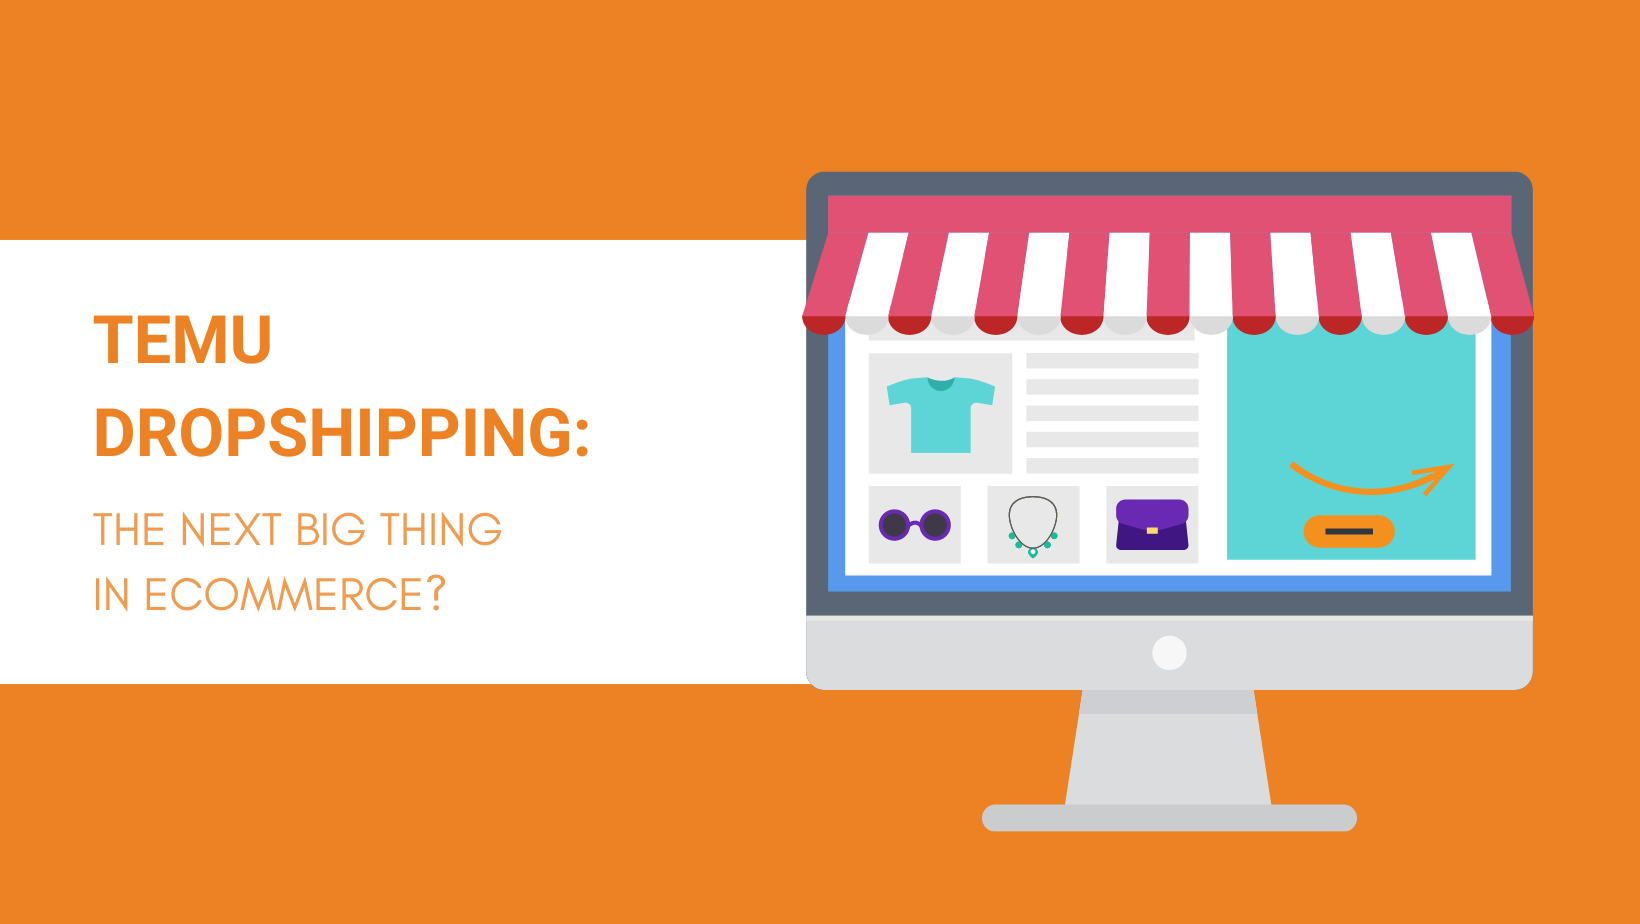 TEMU DROPSHIPPING THE NEXT BIG THING IN ECOMMERCE